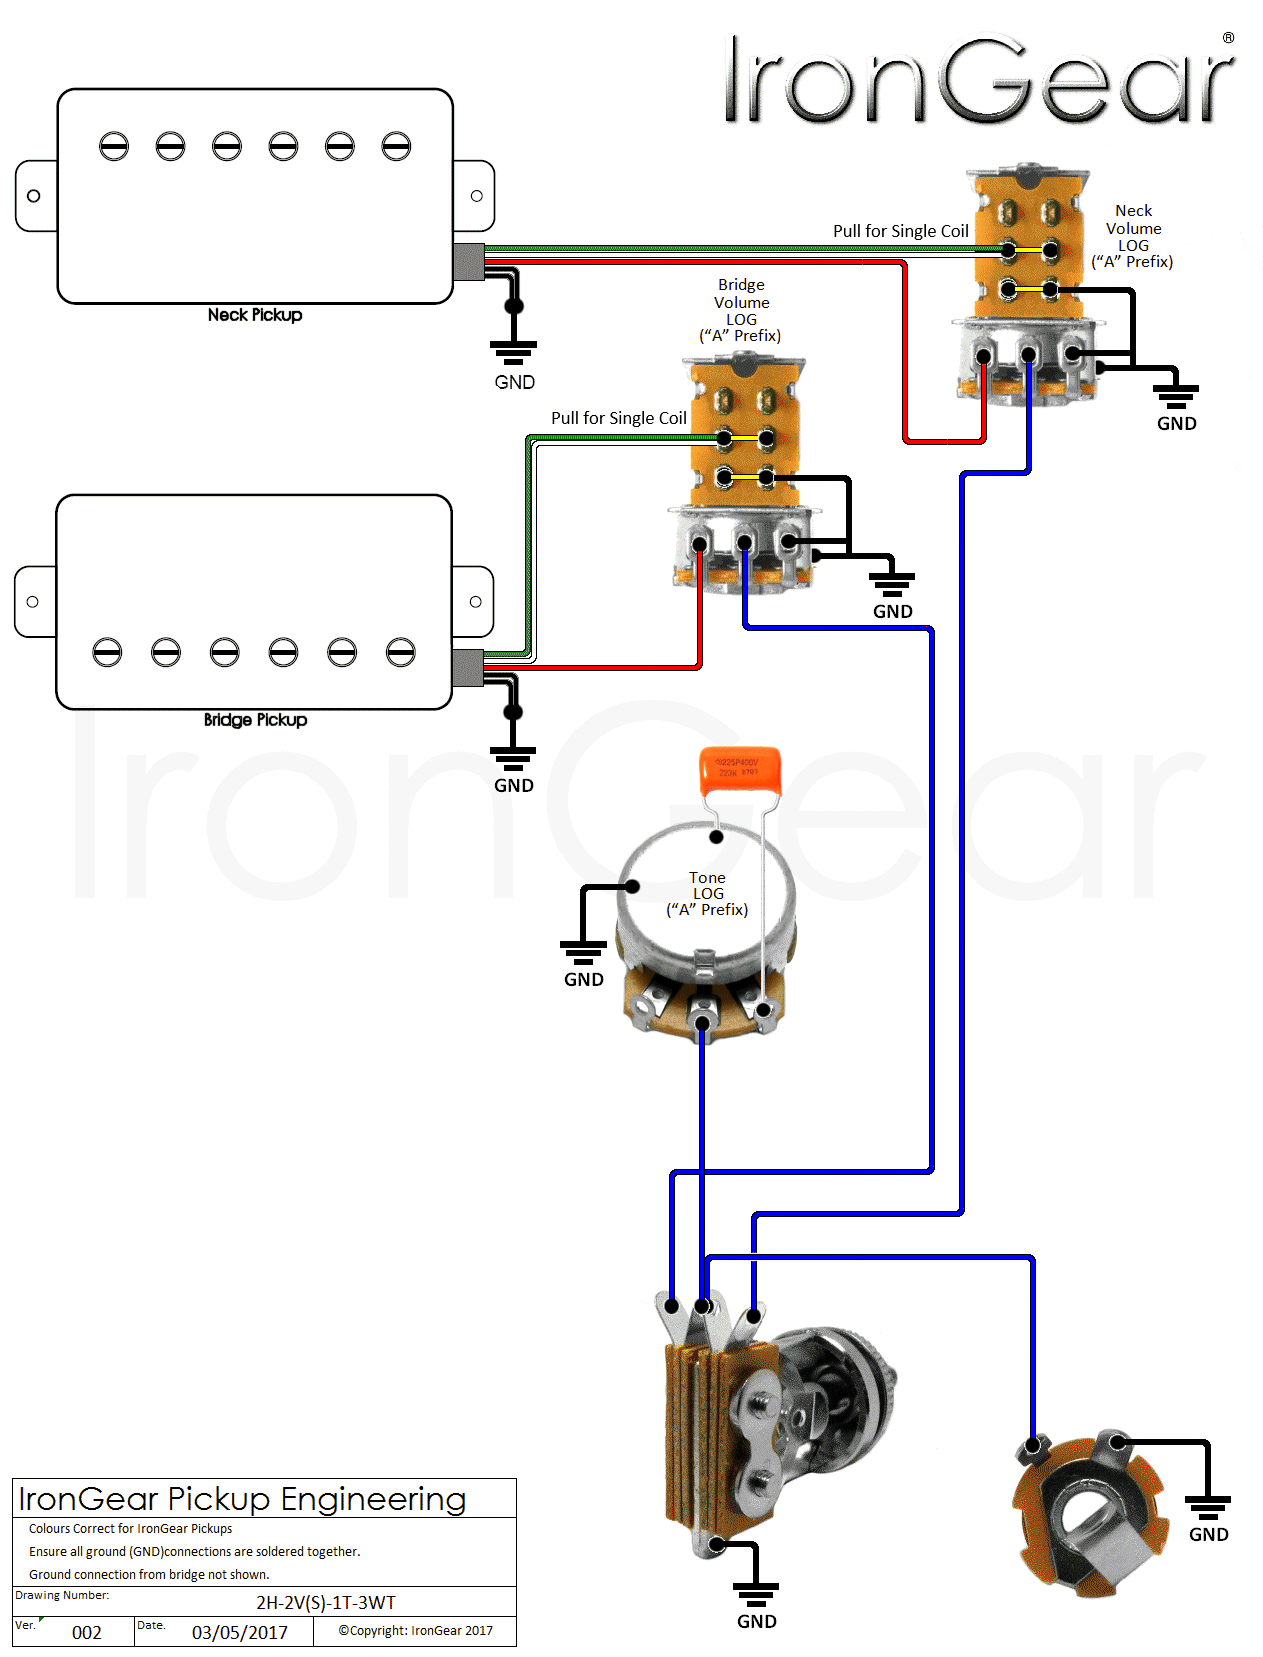 Wiring Diagram For Telecaster Humbucker And Single Coil from www.irongear.co.uk